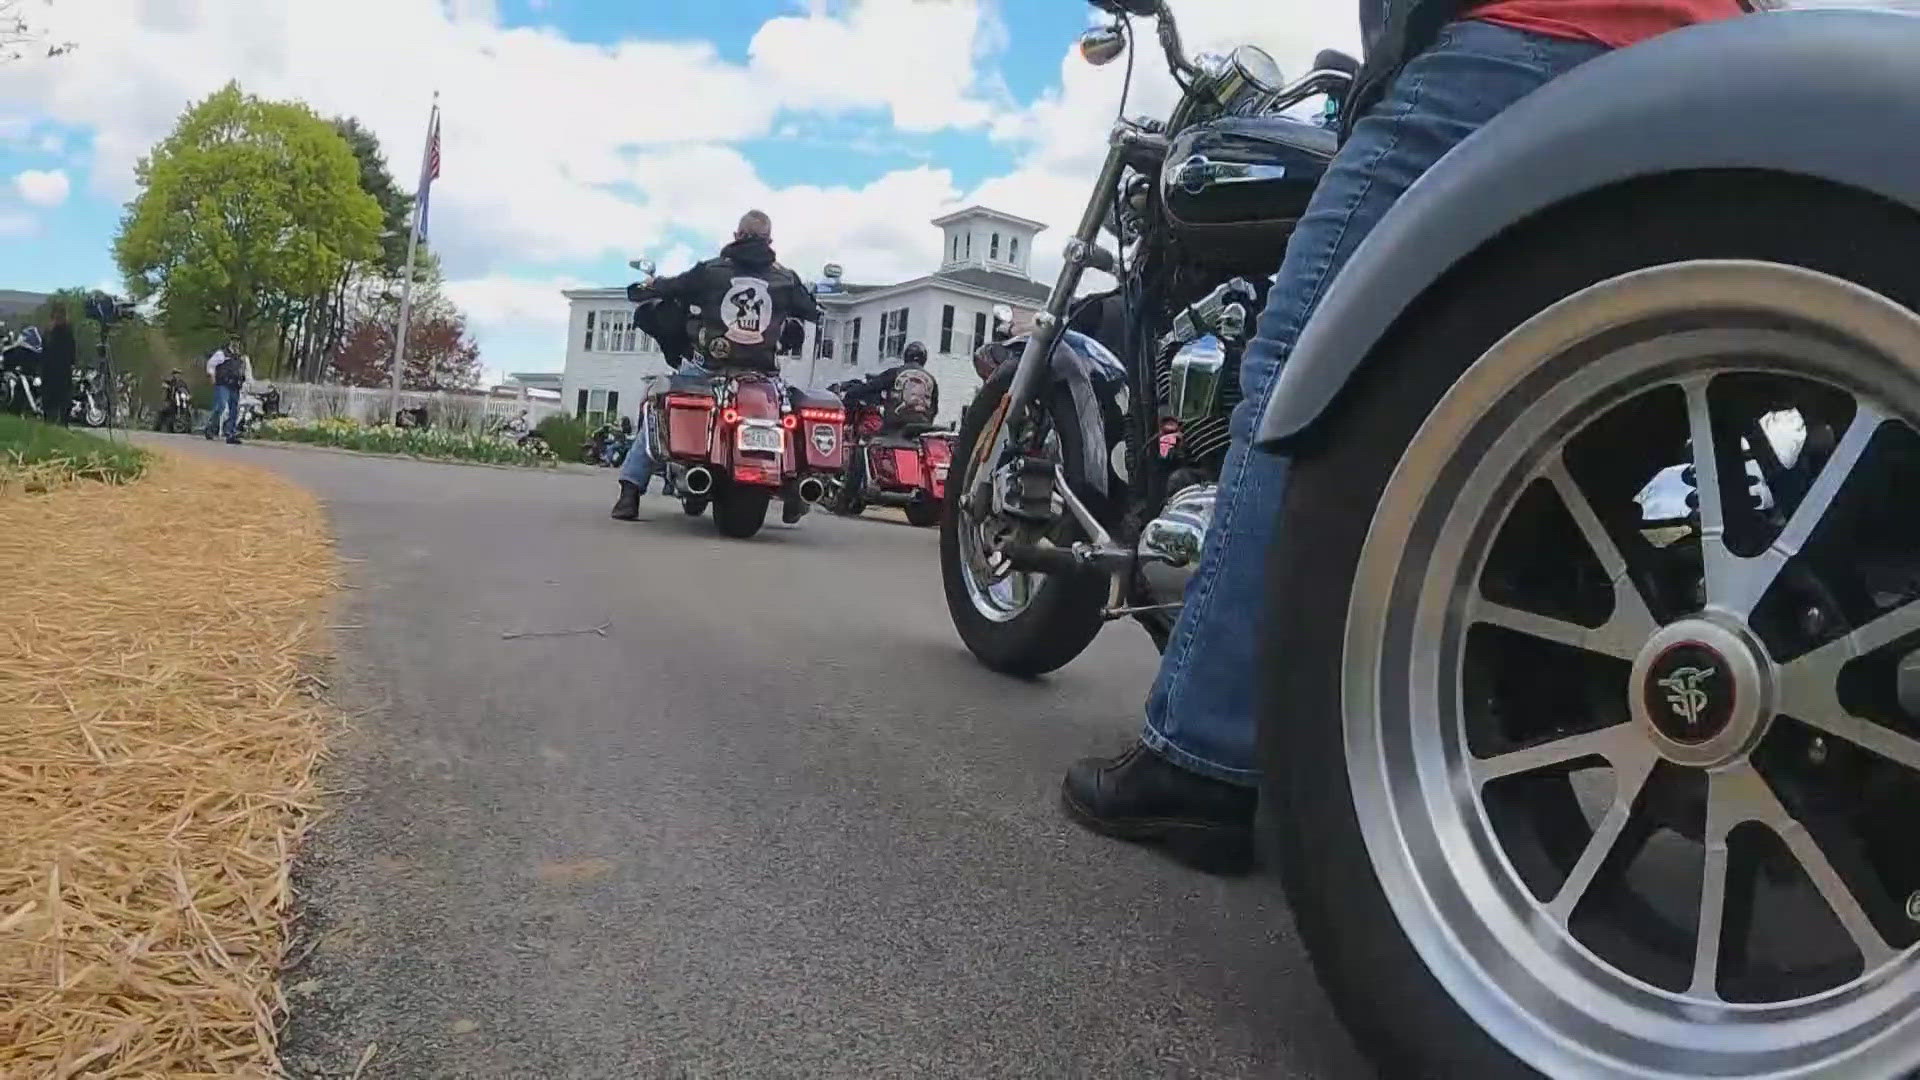 Several spoke about ways to create safe driving for motorcyclists on the roads today.